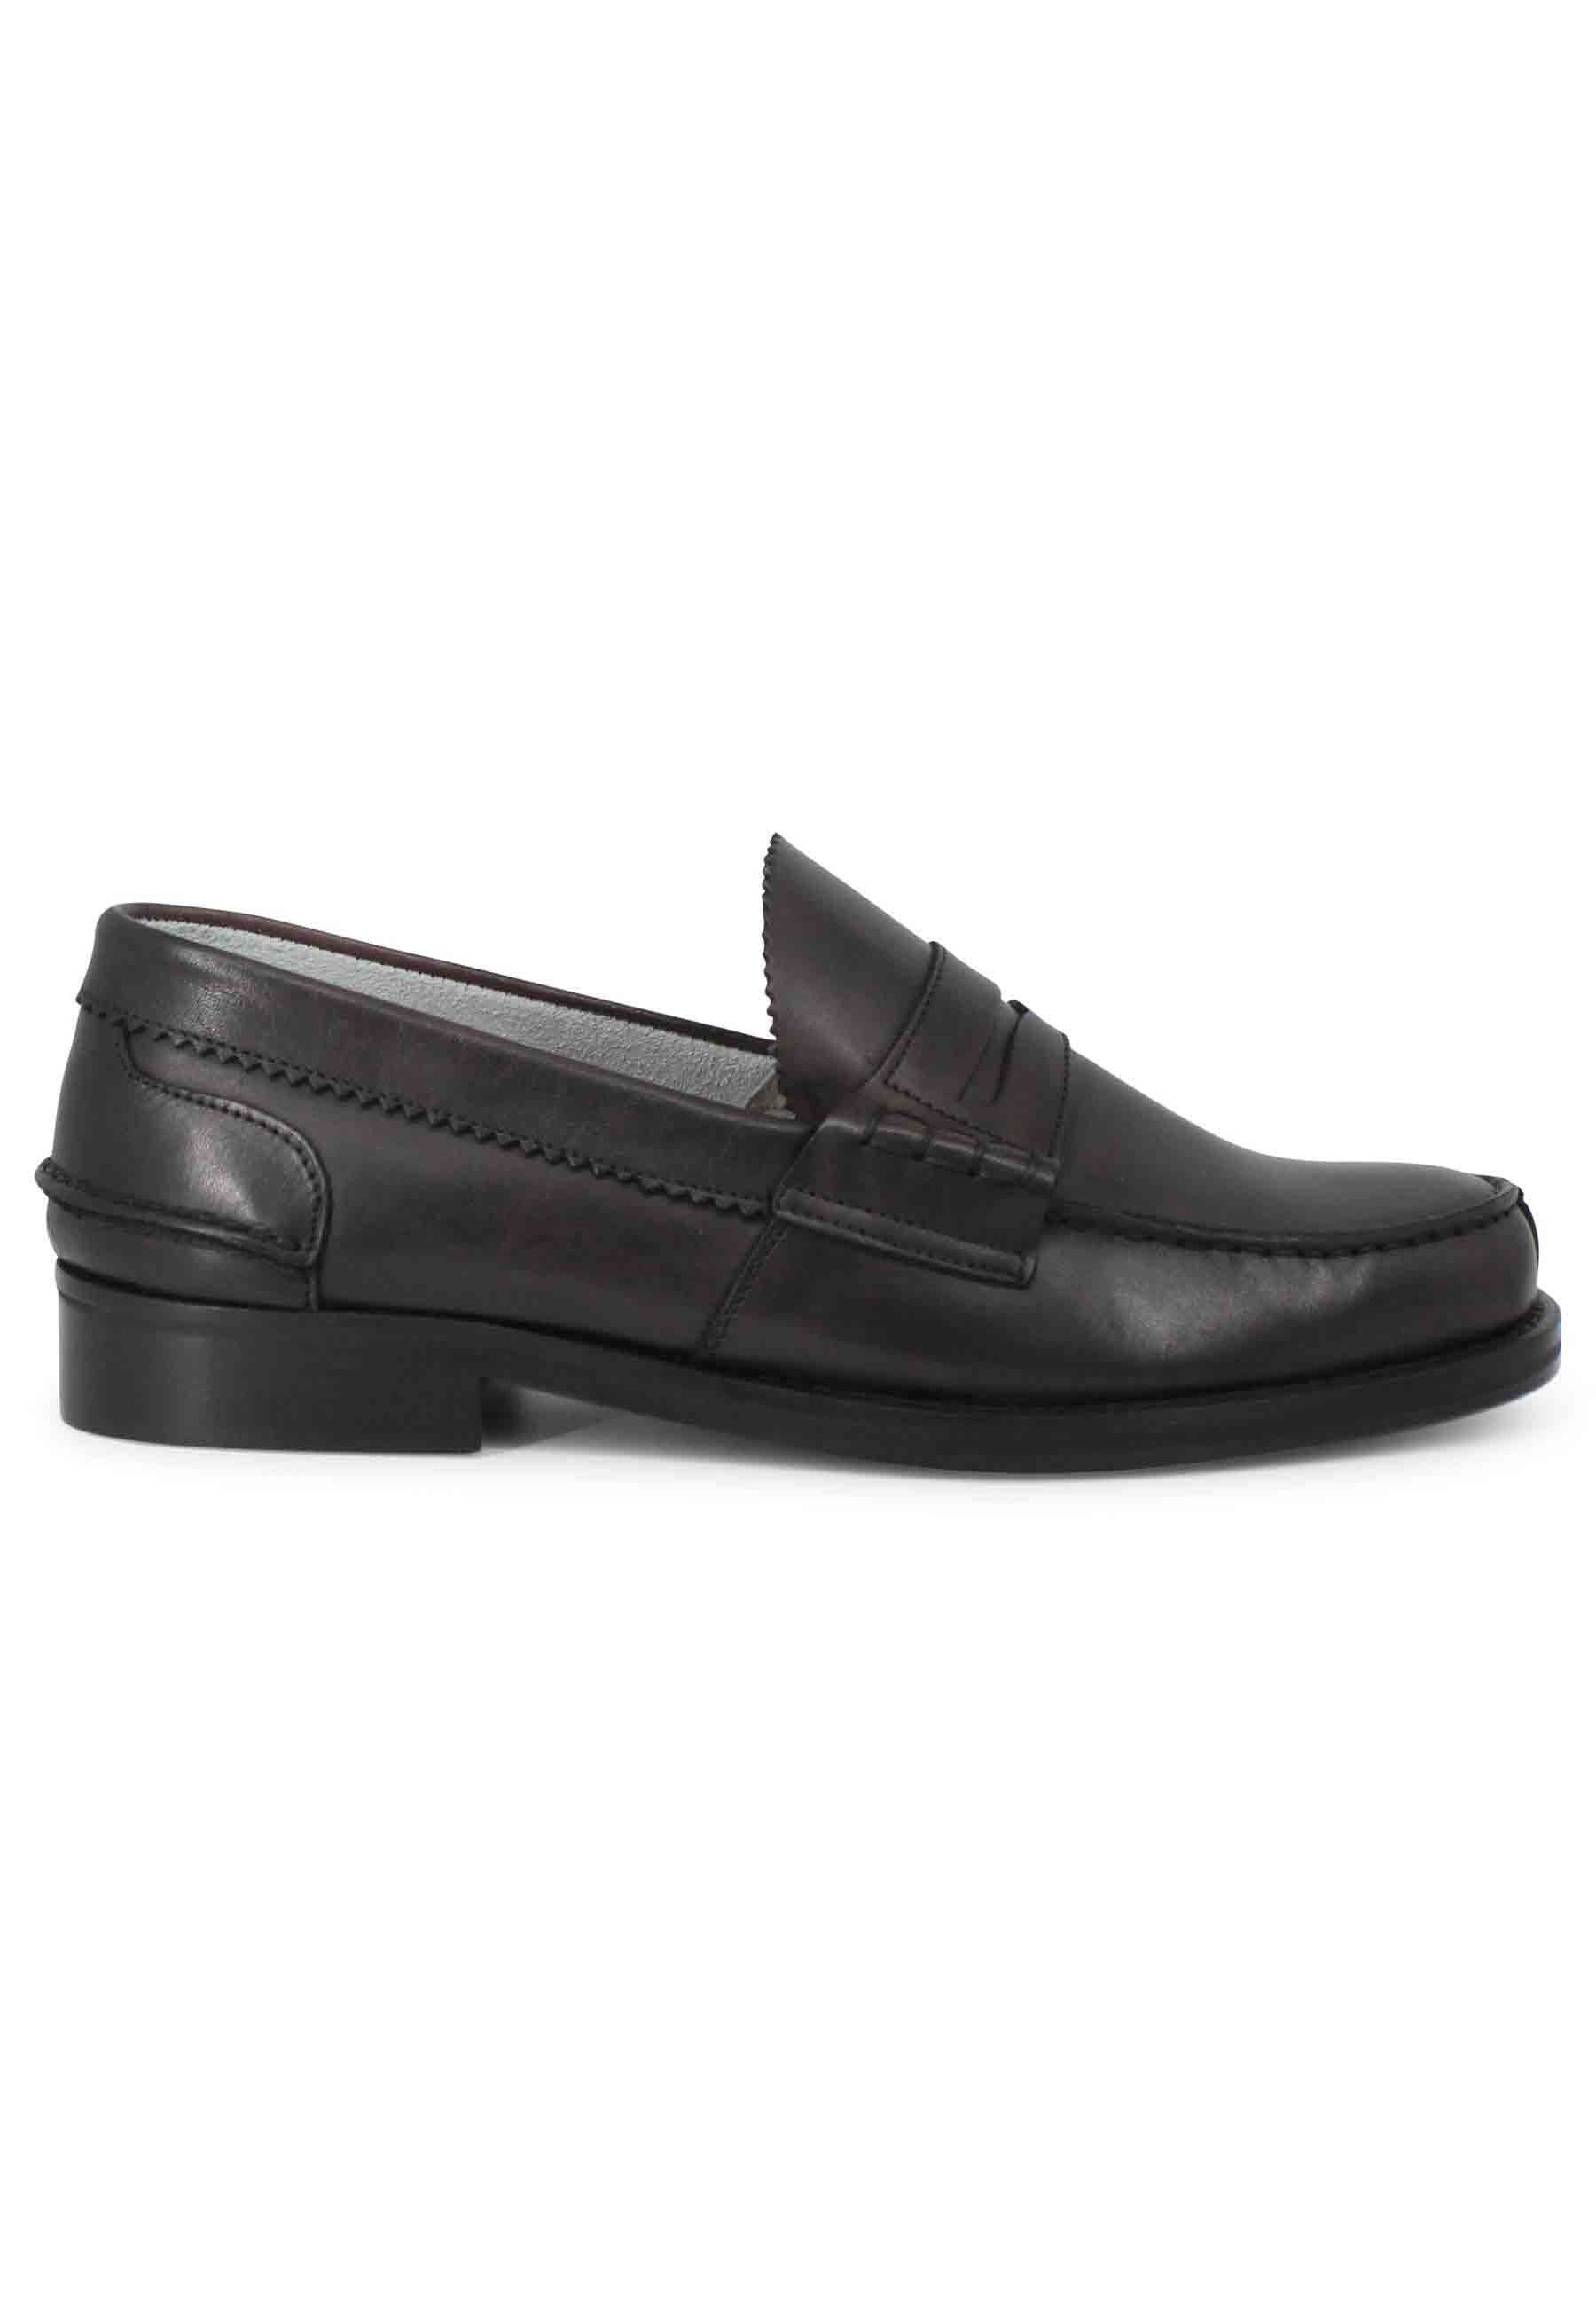 Men's moccasins in dark brown leather and leather sole